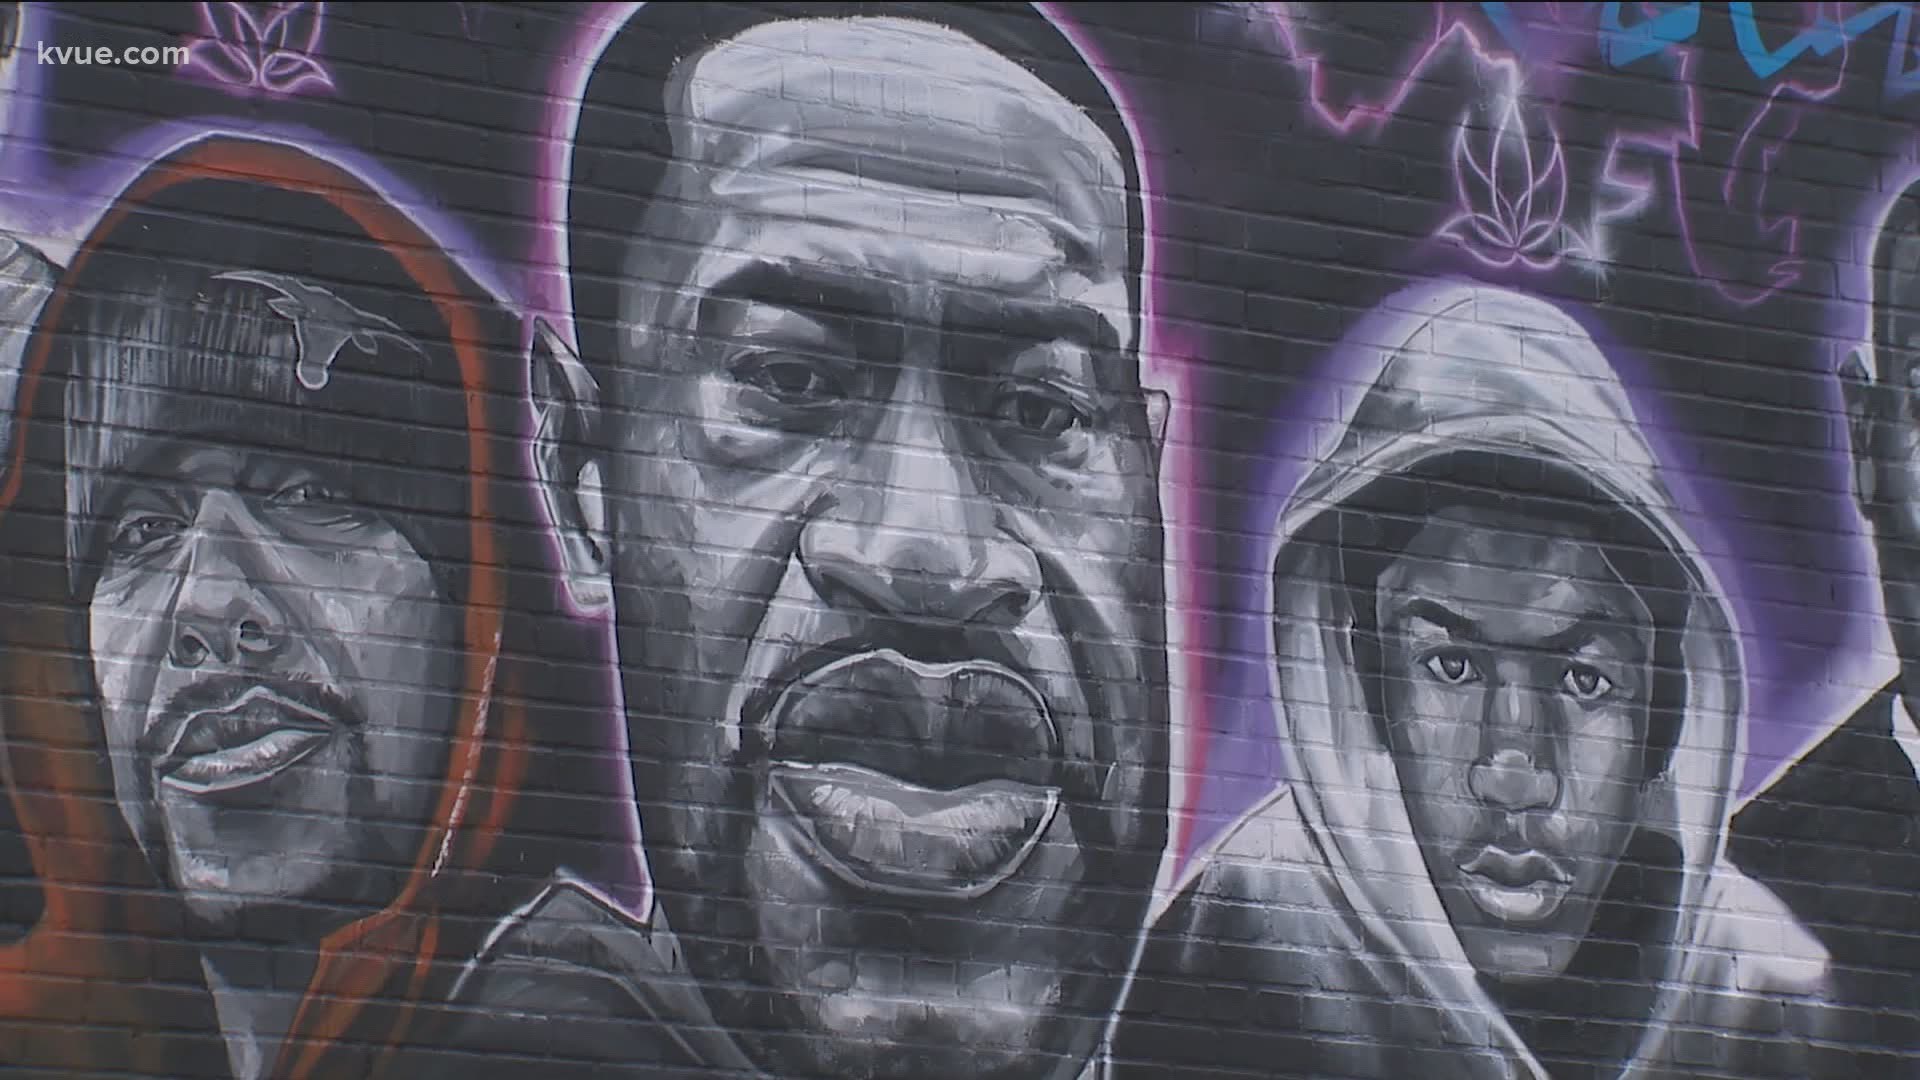 A local artist's mural with a message about police brutality is now finished.